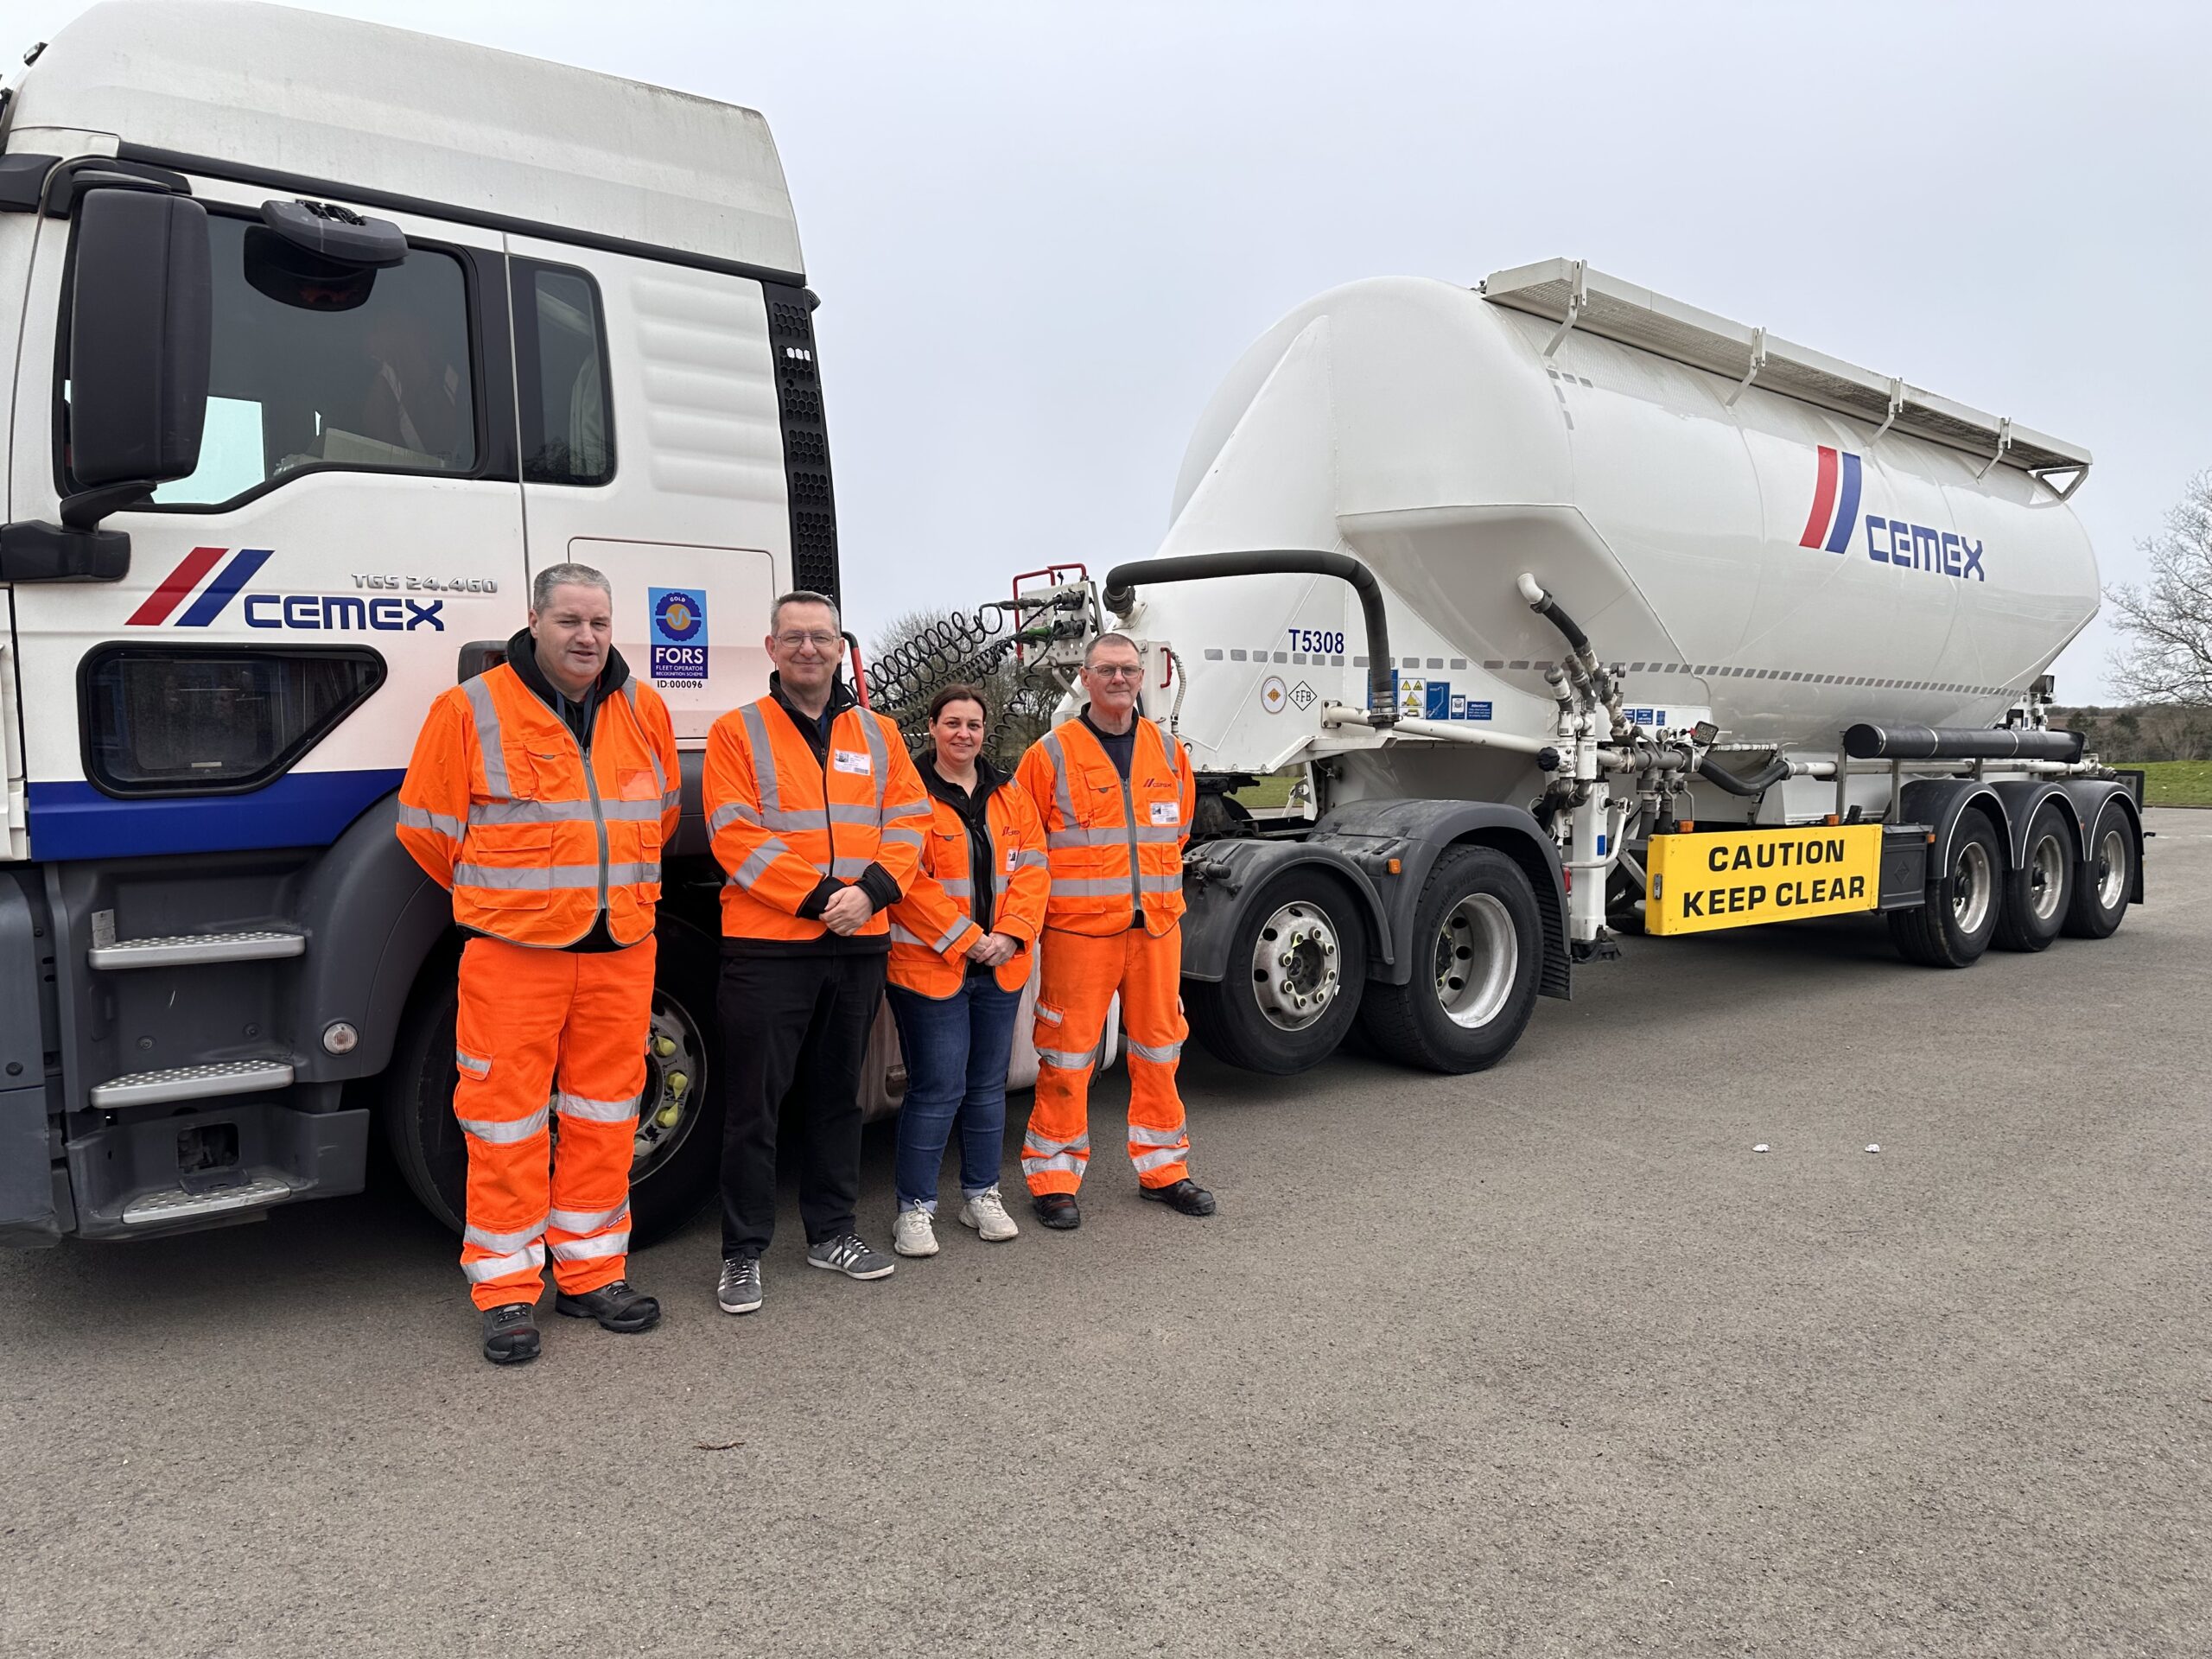 Cemex road safety